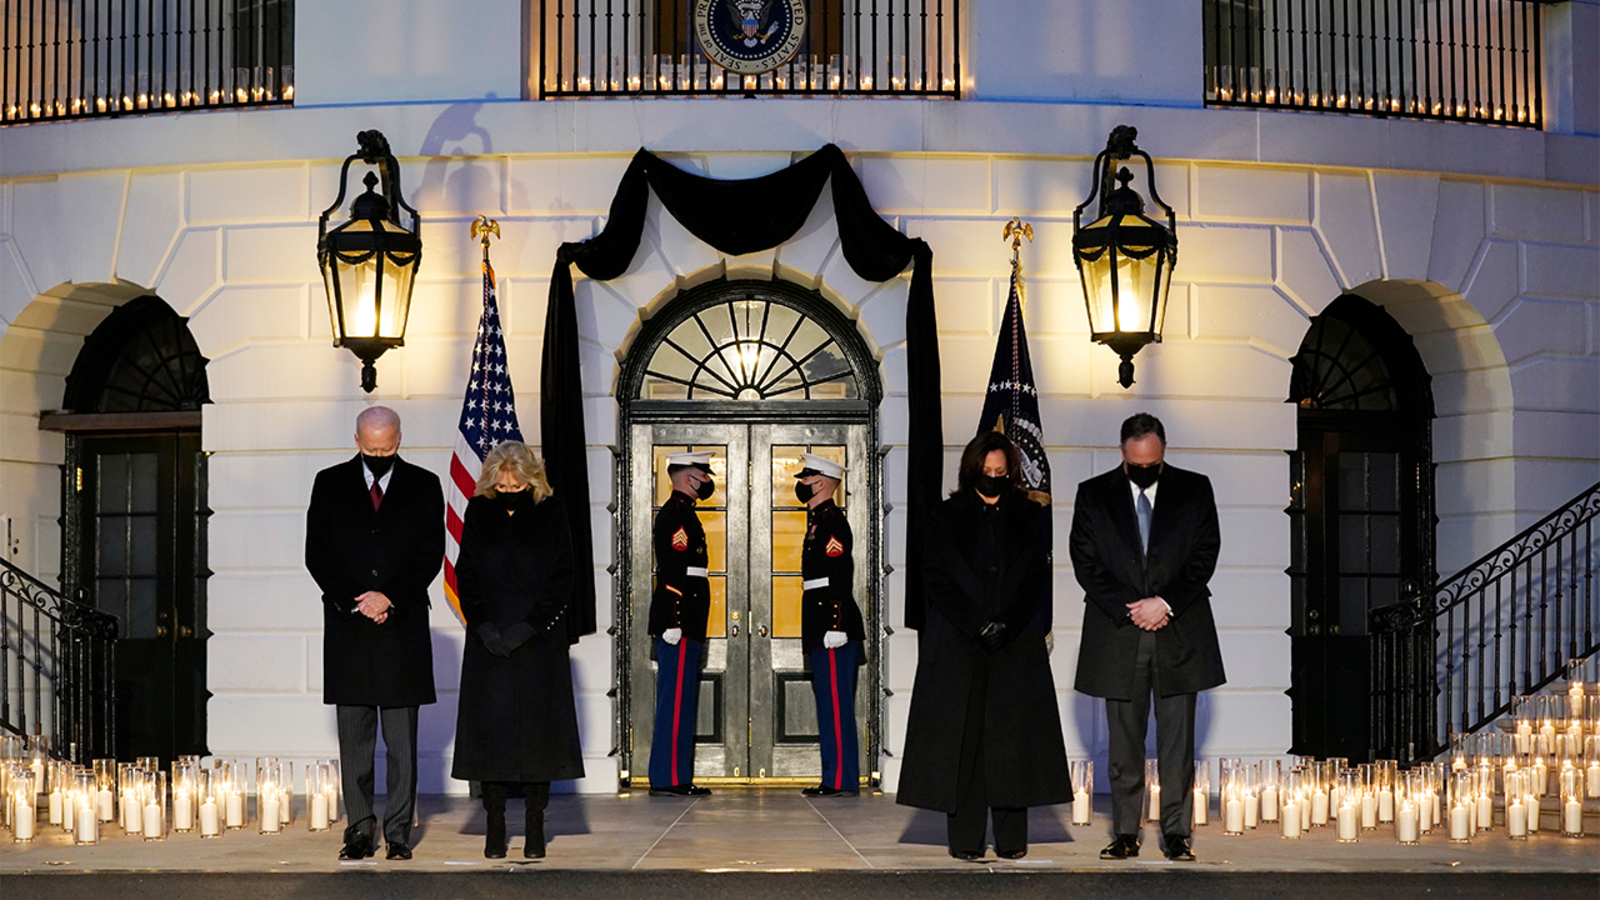 Candles lit at White House to honour 5L Covid deaths in US